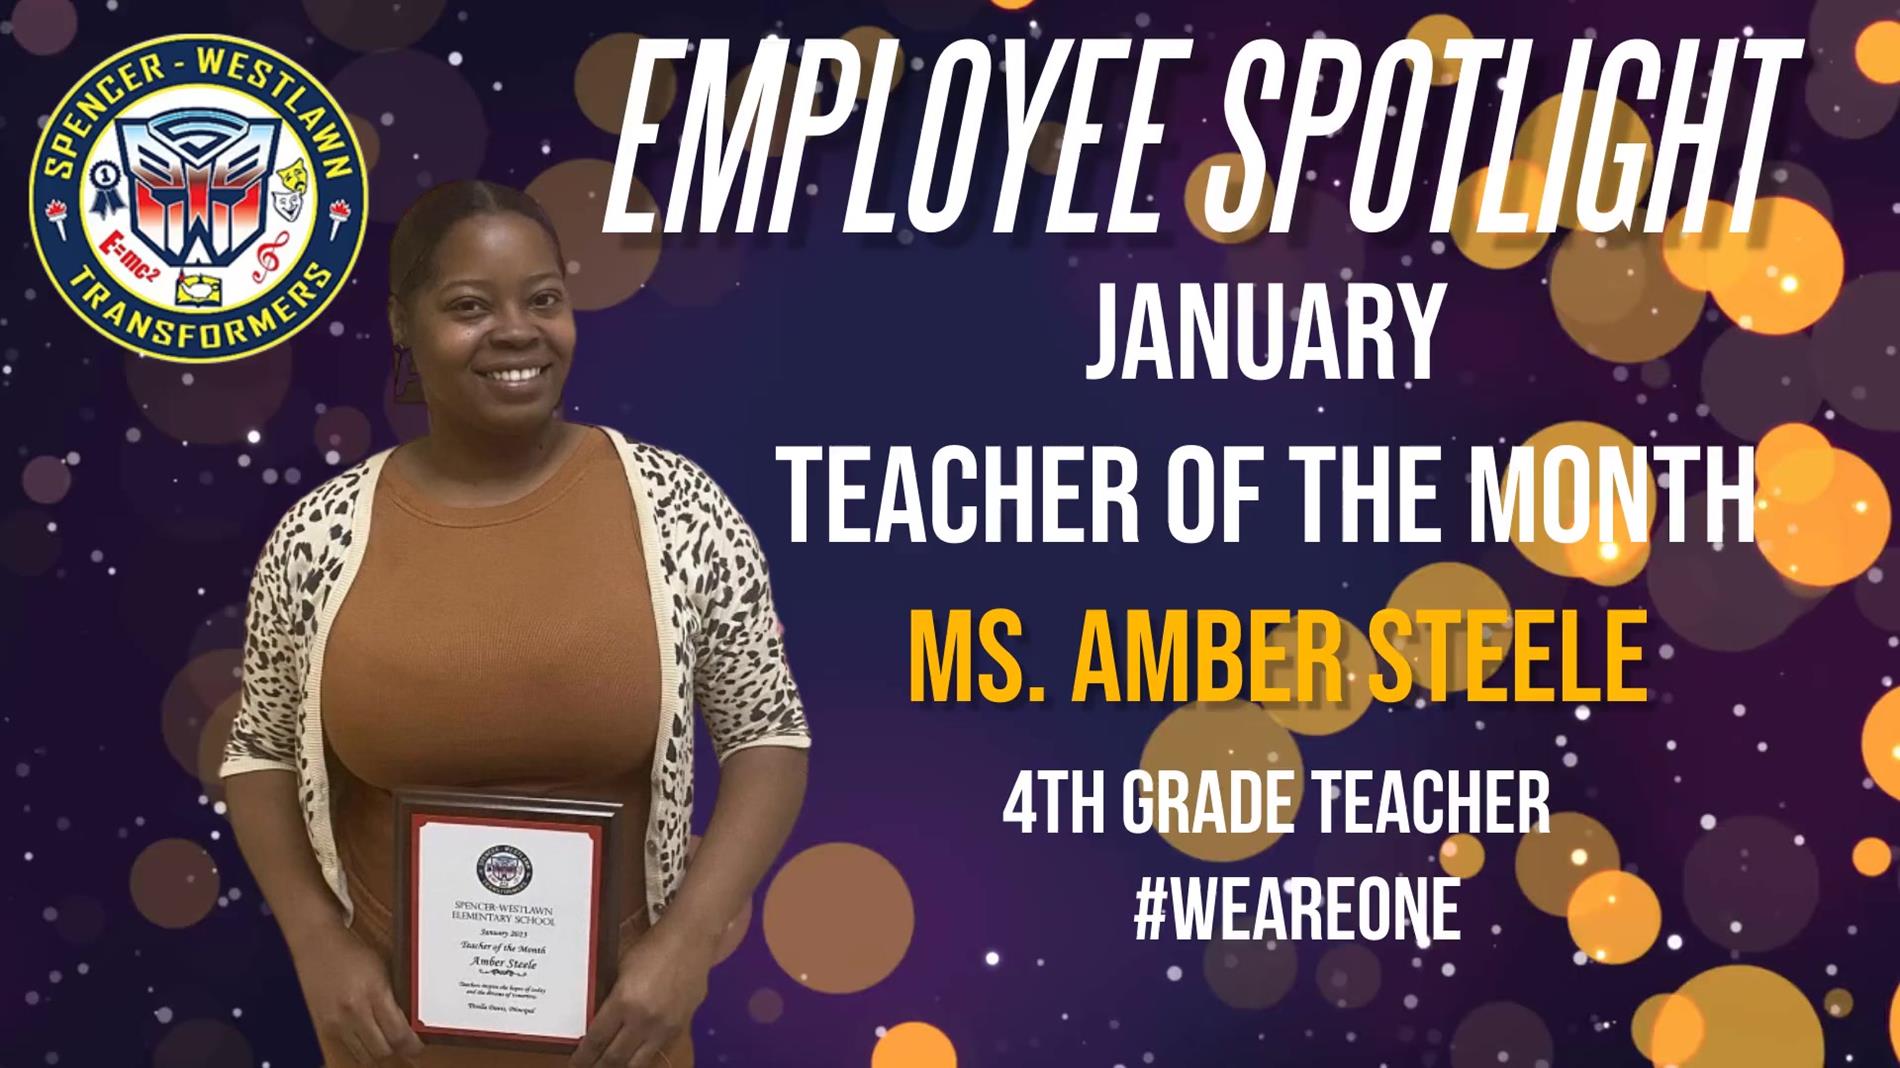 January Employee of the Month Amber Steele